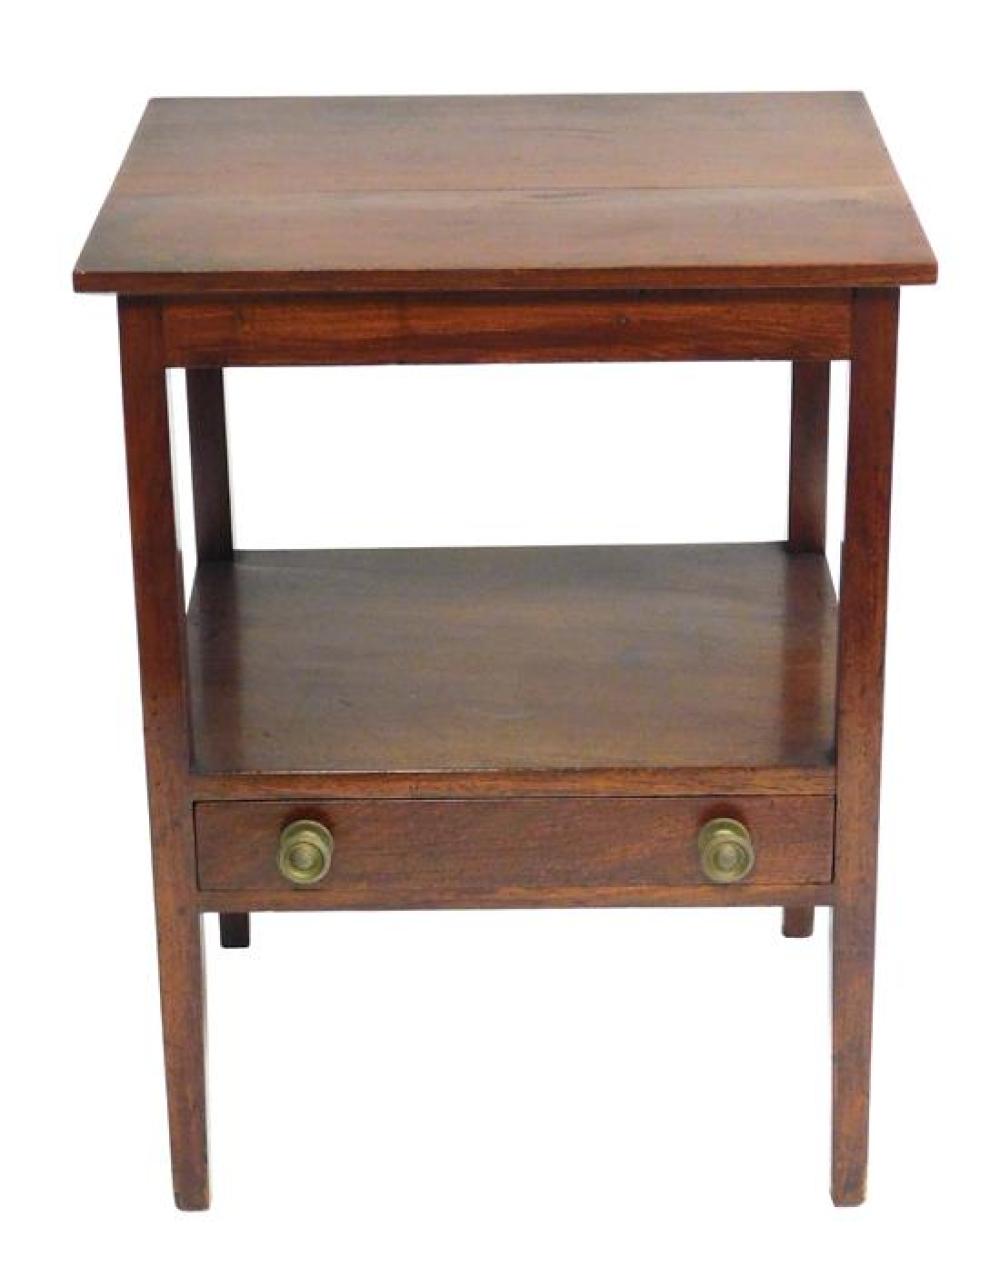 CHERRY SIDE TABLE WITH SINGLE DRAWER 31c290